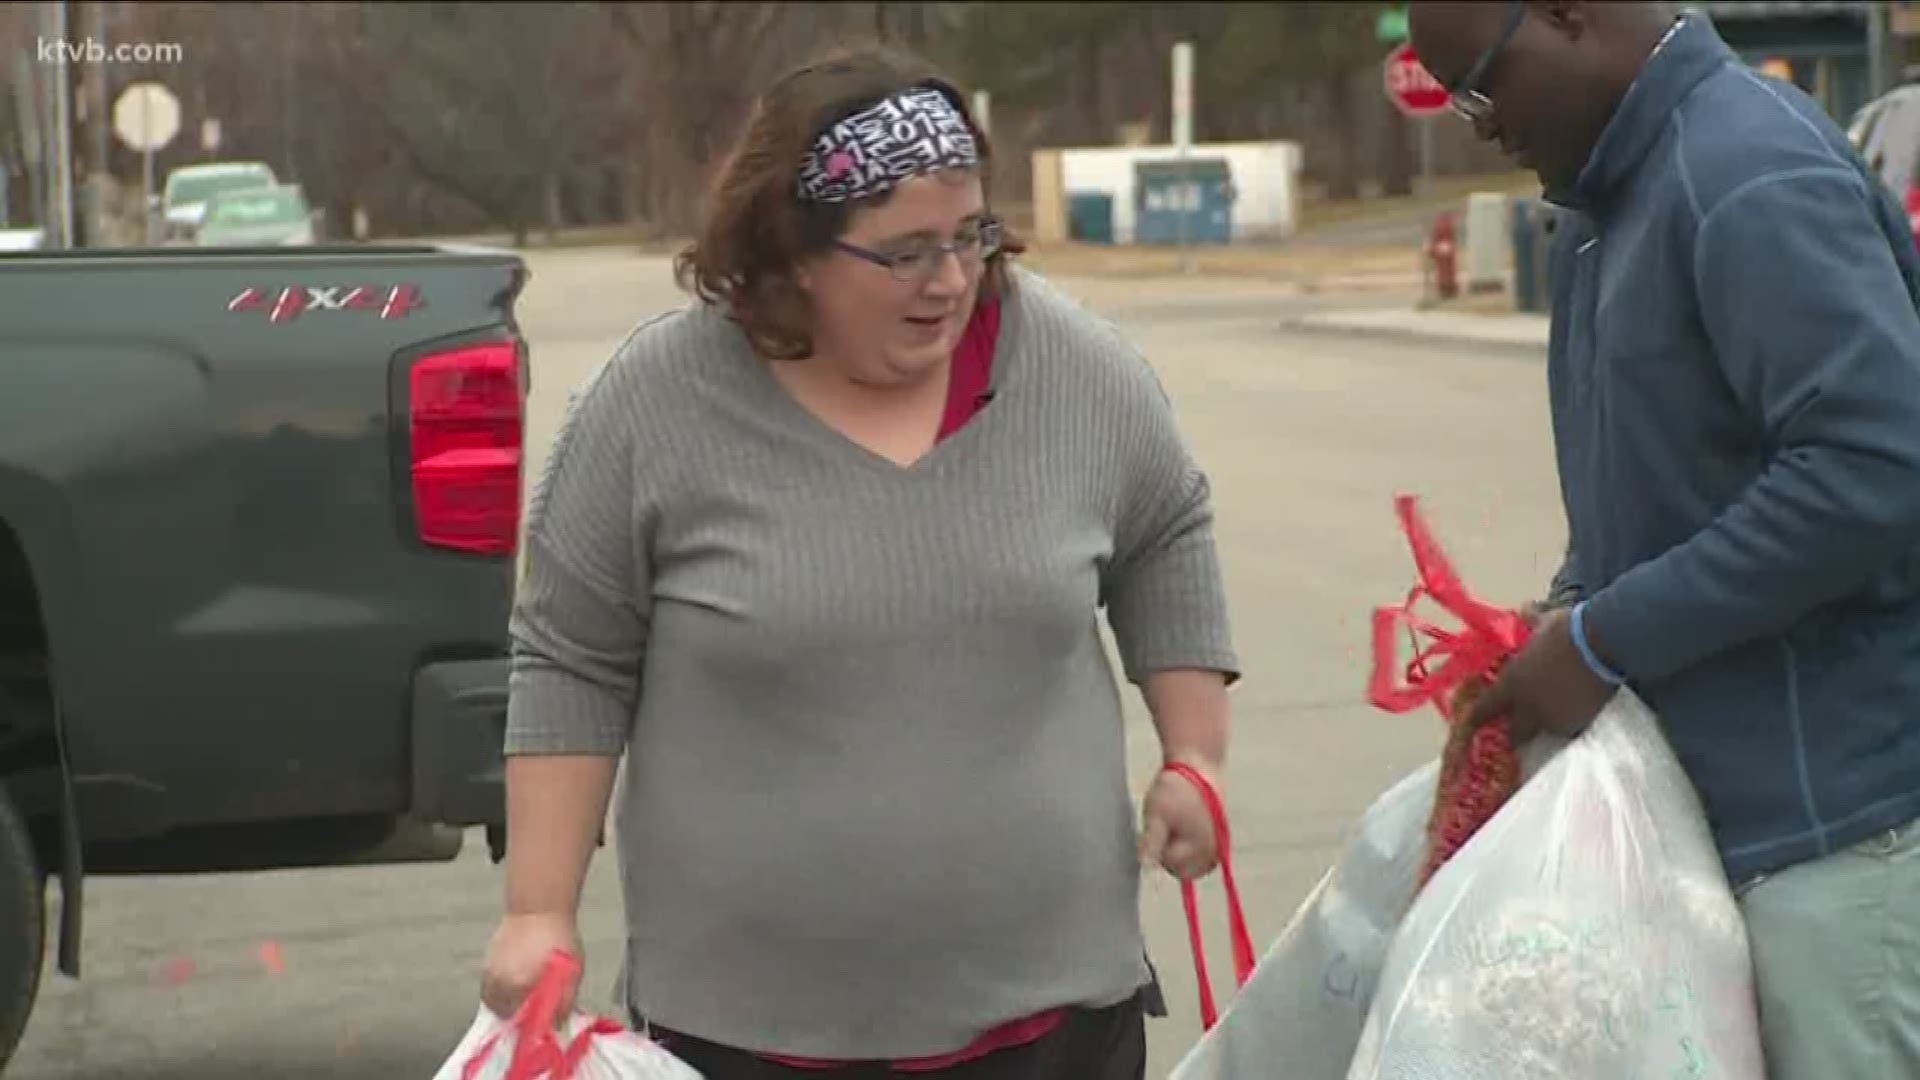 Cheyenne's Gift is donating more than 400 items to make sure the kids do go cold this season.